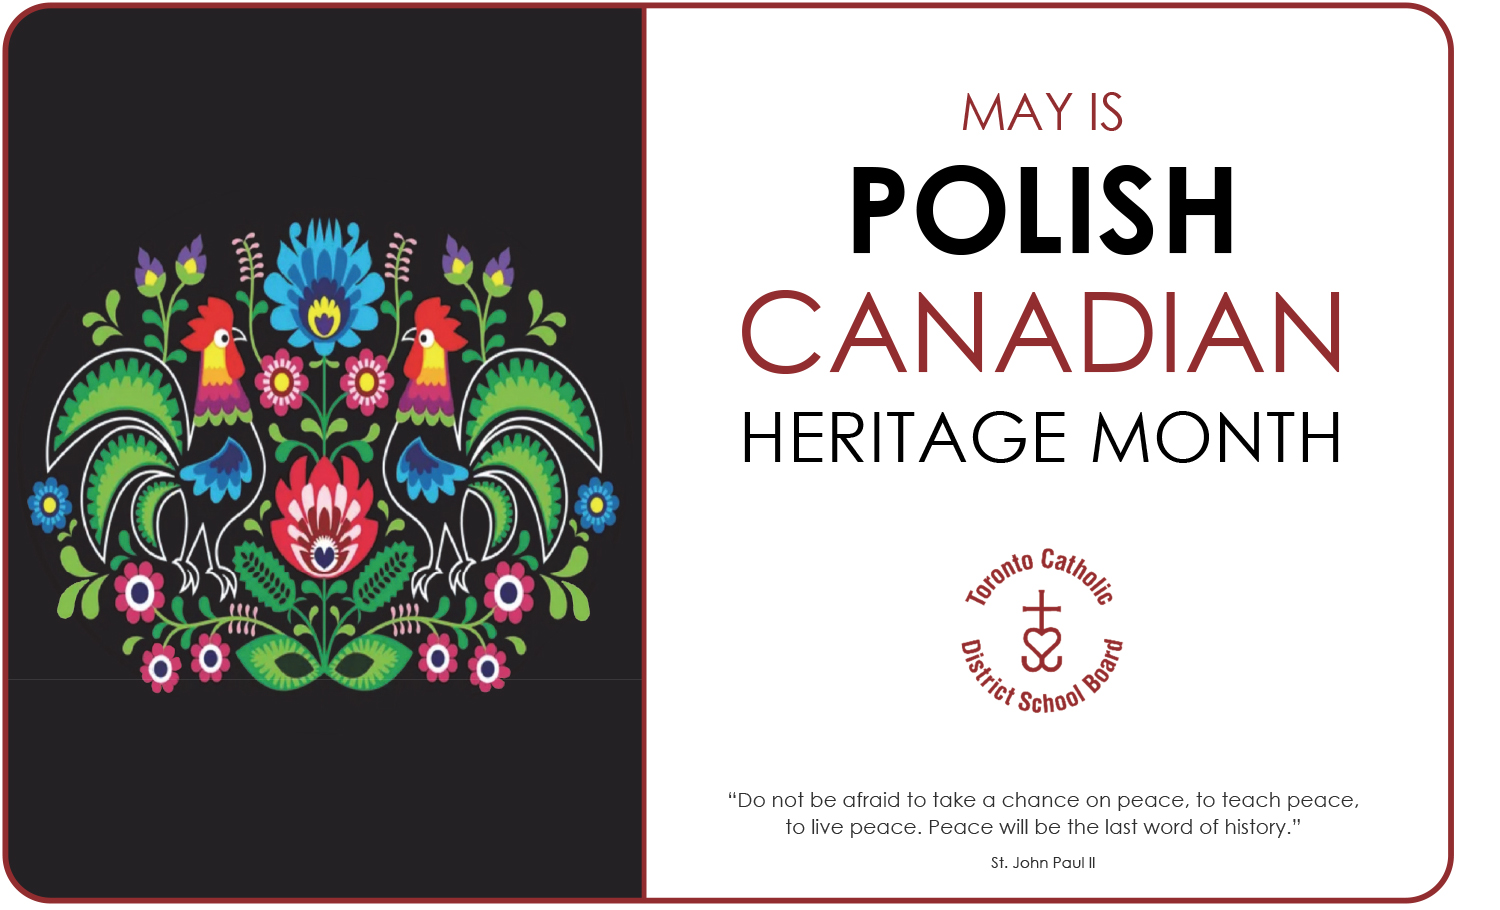 Banner for Polish Canadian Heritage Month, showing on the left a colourful vector drawing on a black background of flowers, leaves, cockerels and feathers reminiscent of the style of wycinanki Polish folk art. On the right are the words "MAY IS POLISH CANADIAN HERITAGE MONTH", with the circular TCDSB logo below, and below it is the quote "Do not be afraid to take a chance on peace, to teach peace, to live peace. Peace will be the last word of history." by St. John Paul II.